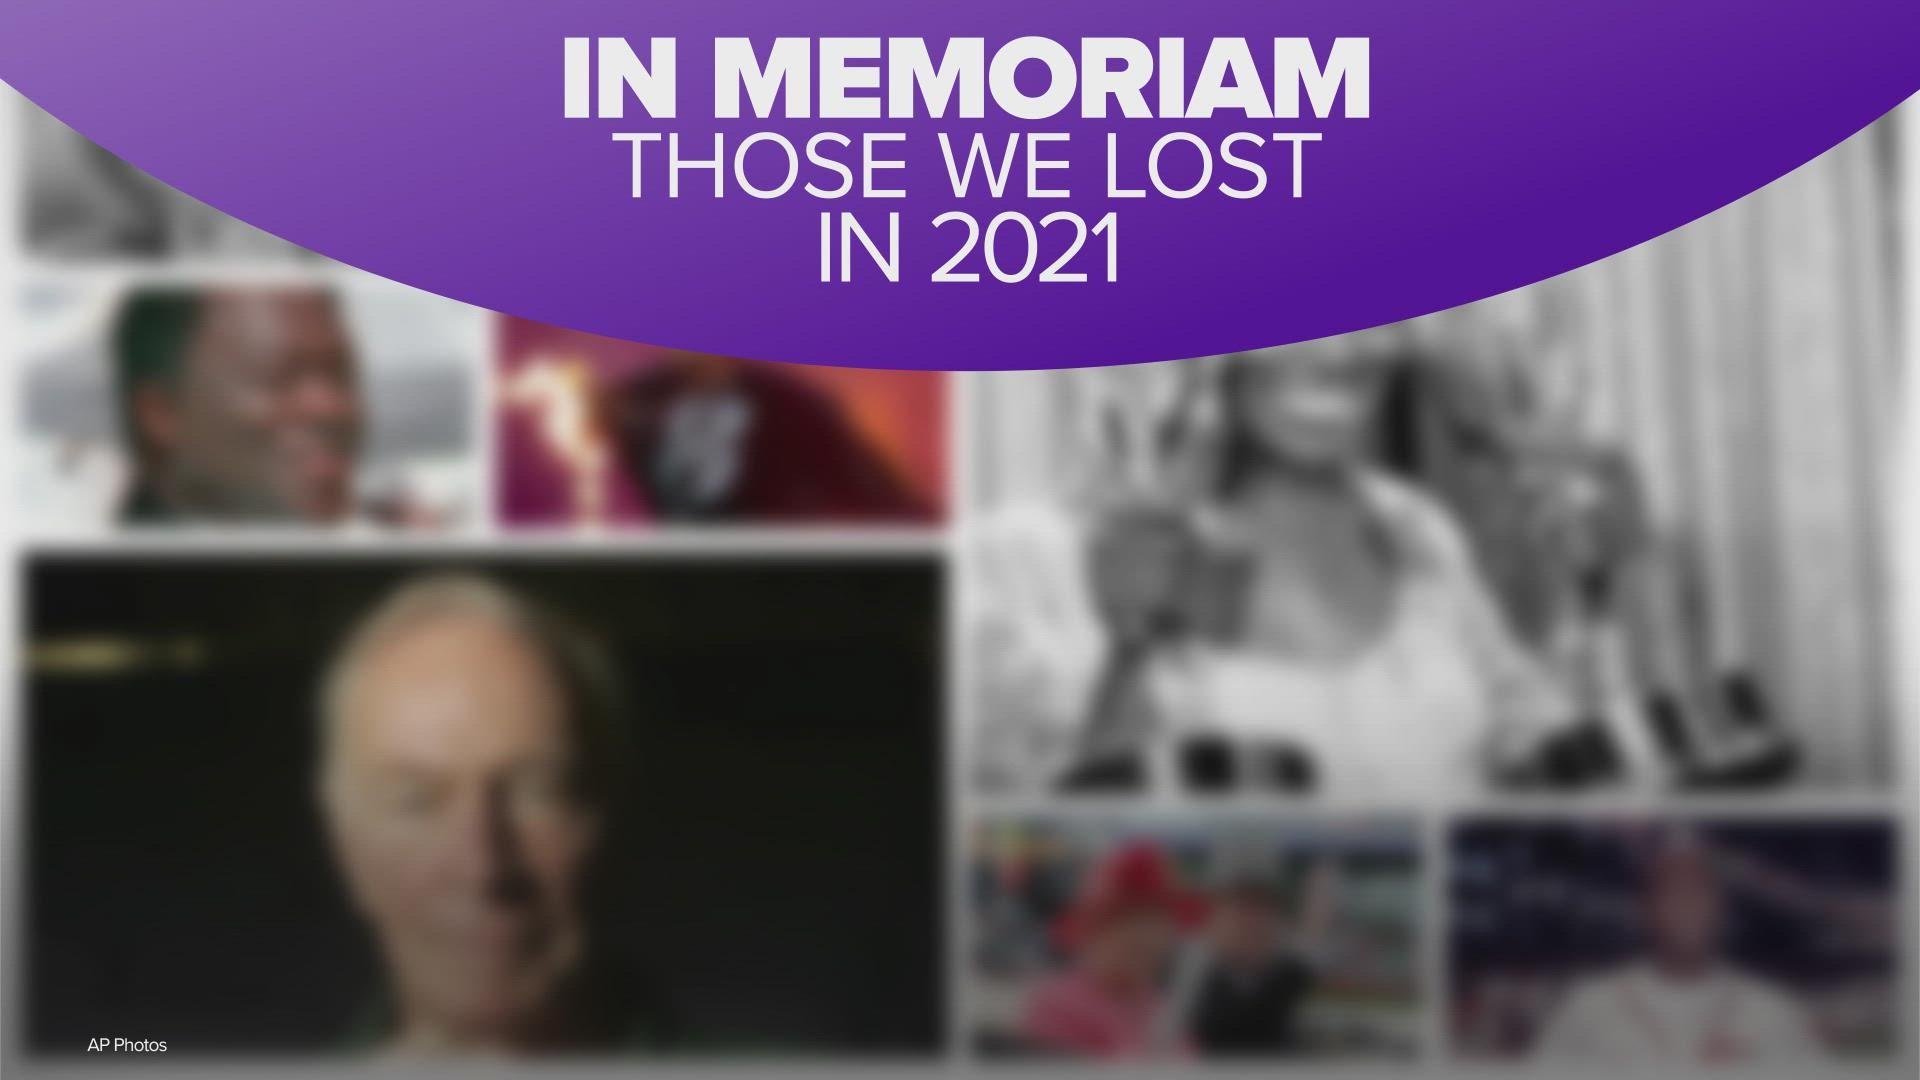 Carolina Sampaio - The newsmakers who died in 2021 | newscentermaine.com